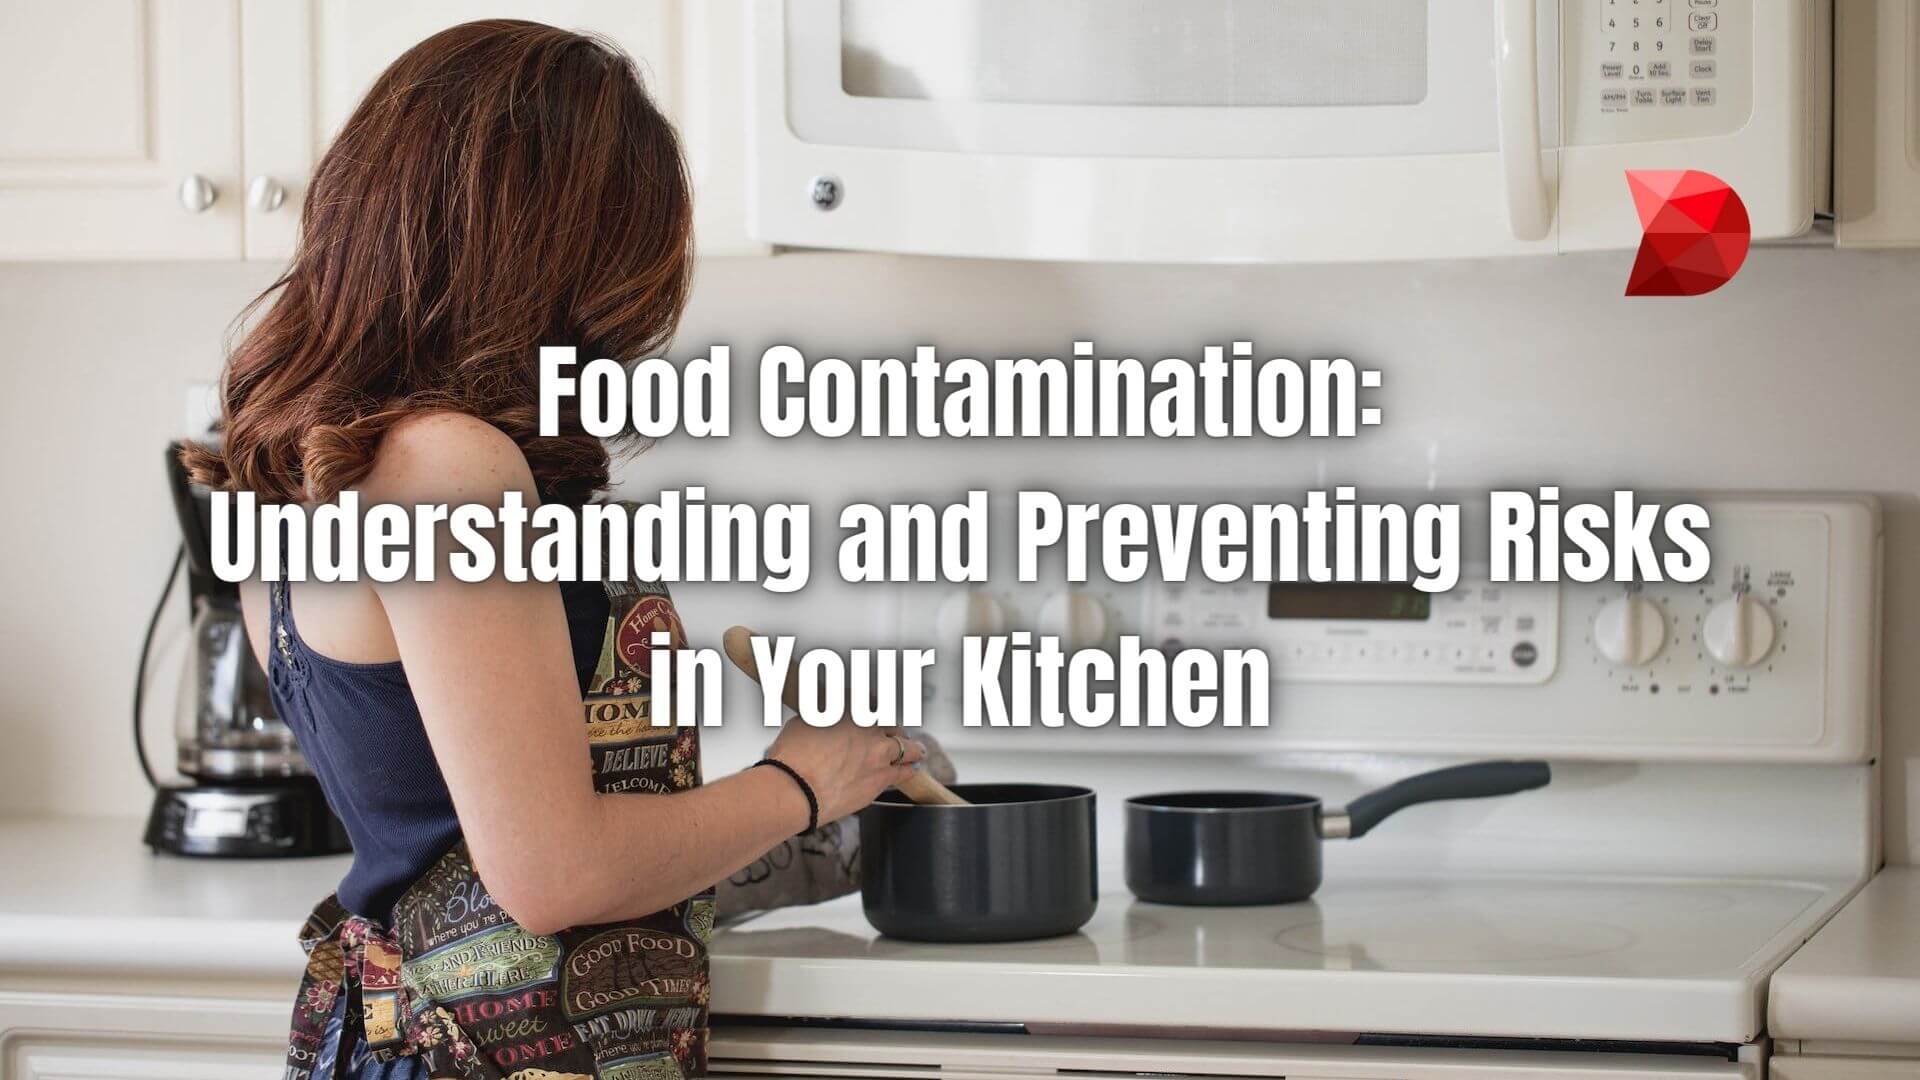 Discover the key to a safer kitchen! Explore this guide on food contamination risks and learn effective prevention methods today.